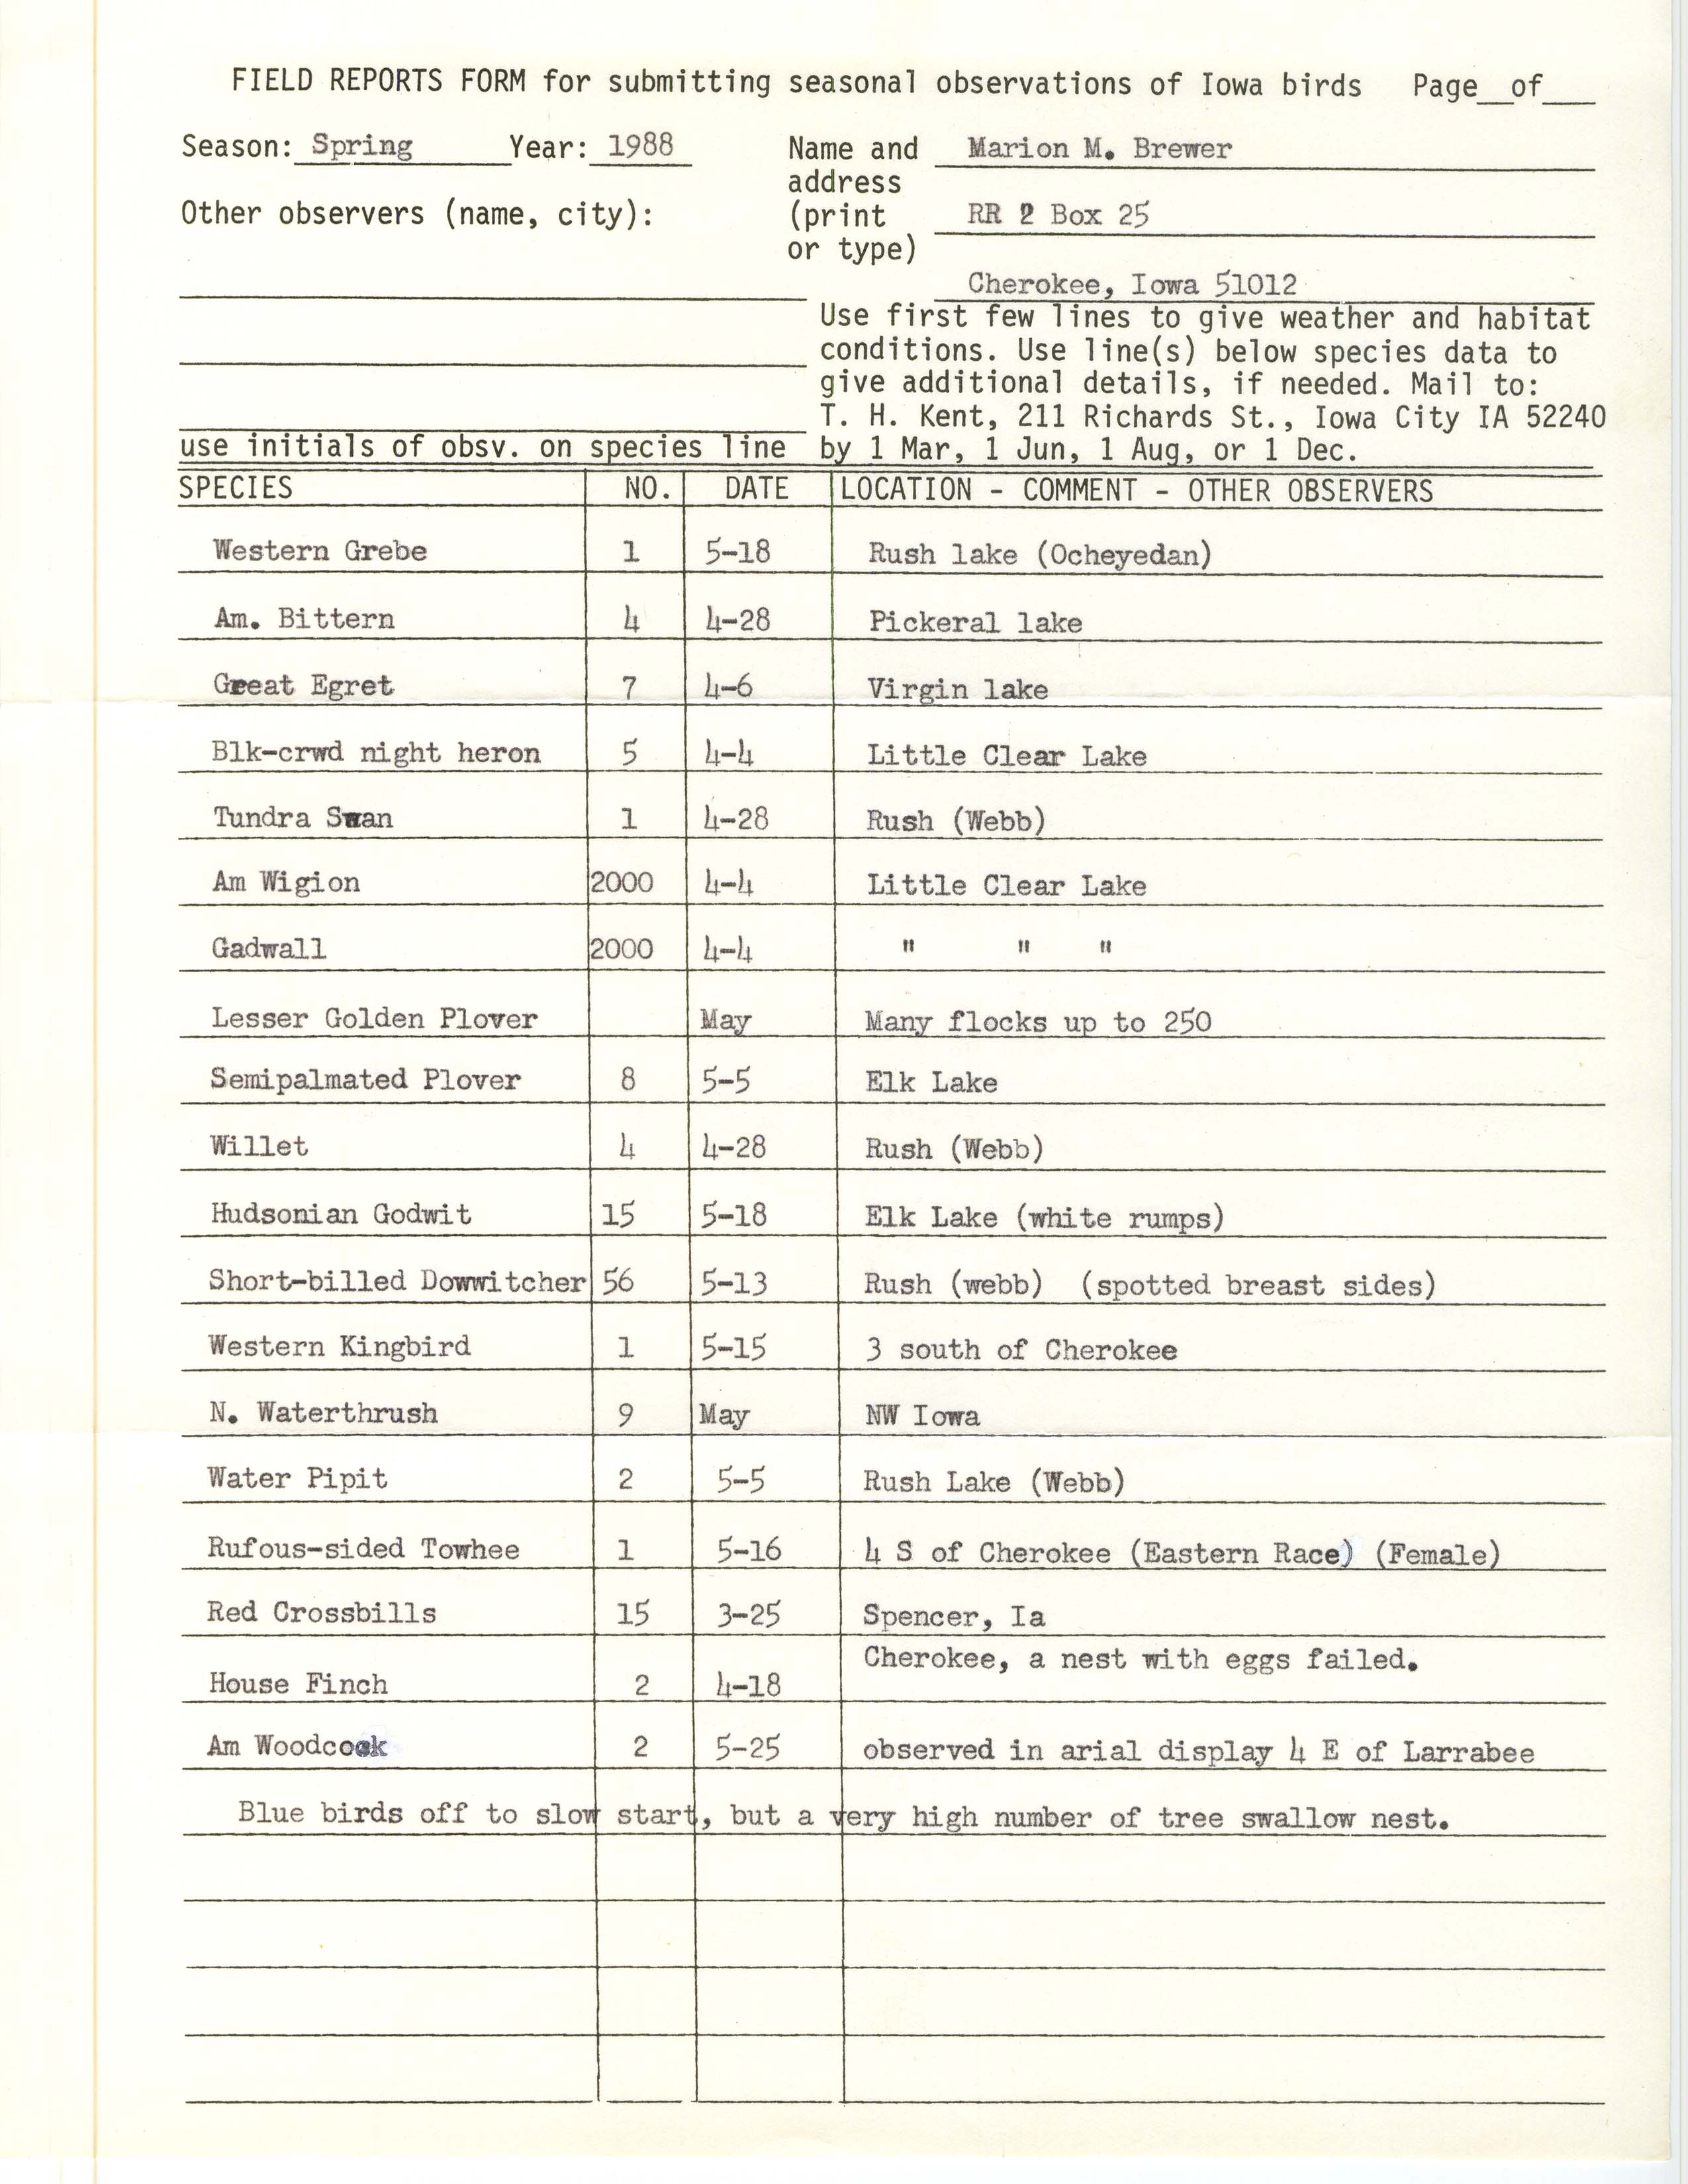 Field reports form for submitting seasonal observations of Iowa birds, Marion M. Brewer, spring 1988